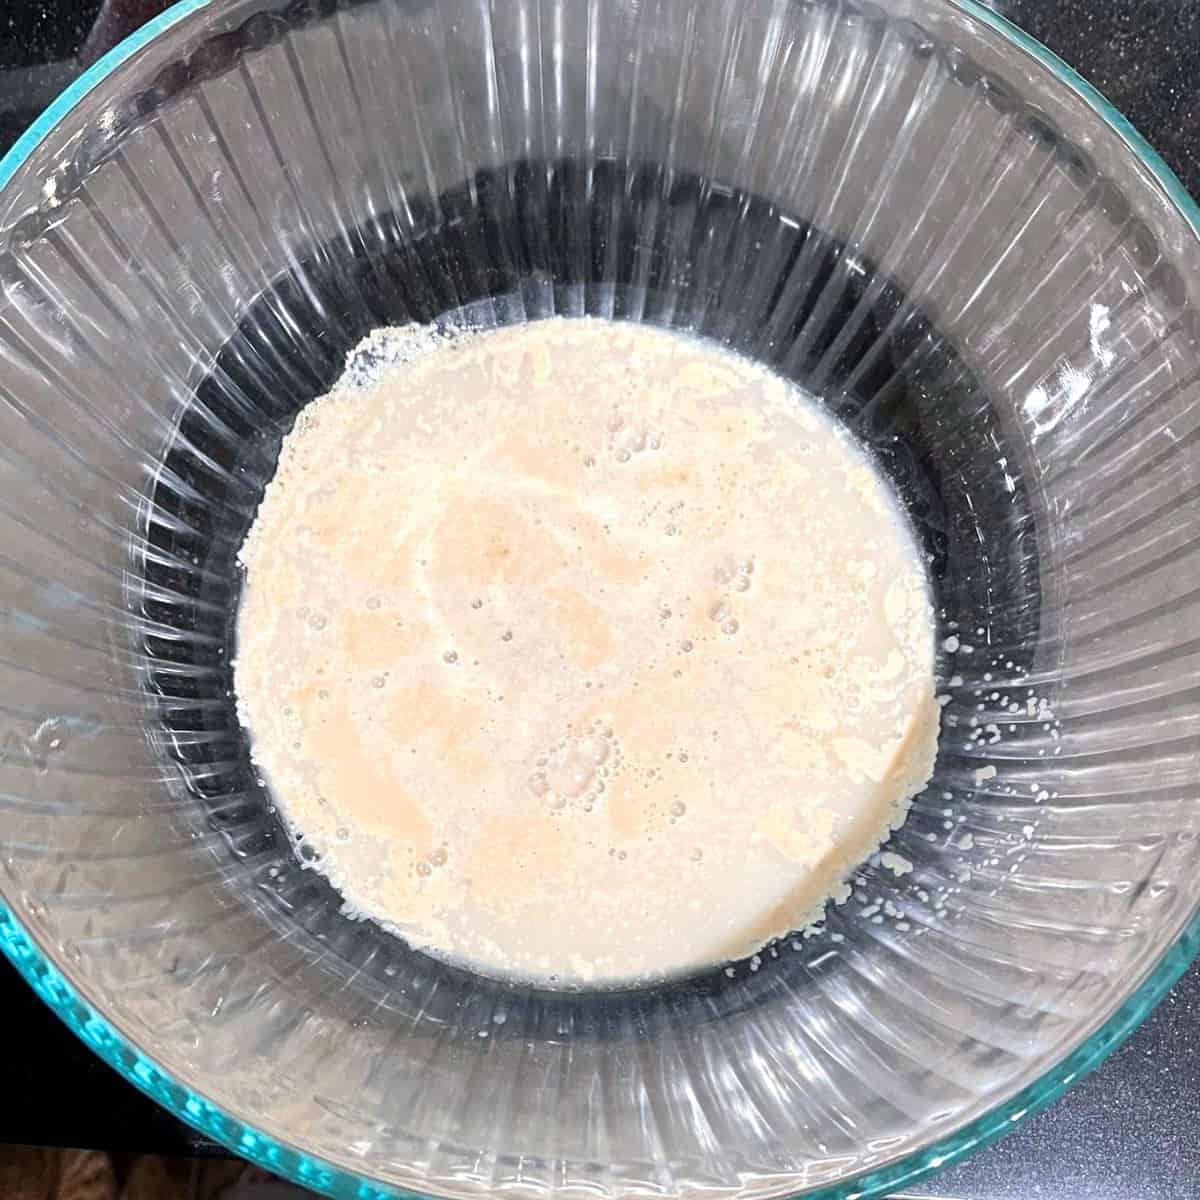 Yeast, sugar and water mixed in bowl.